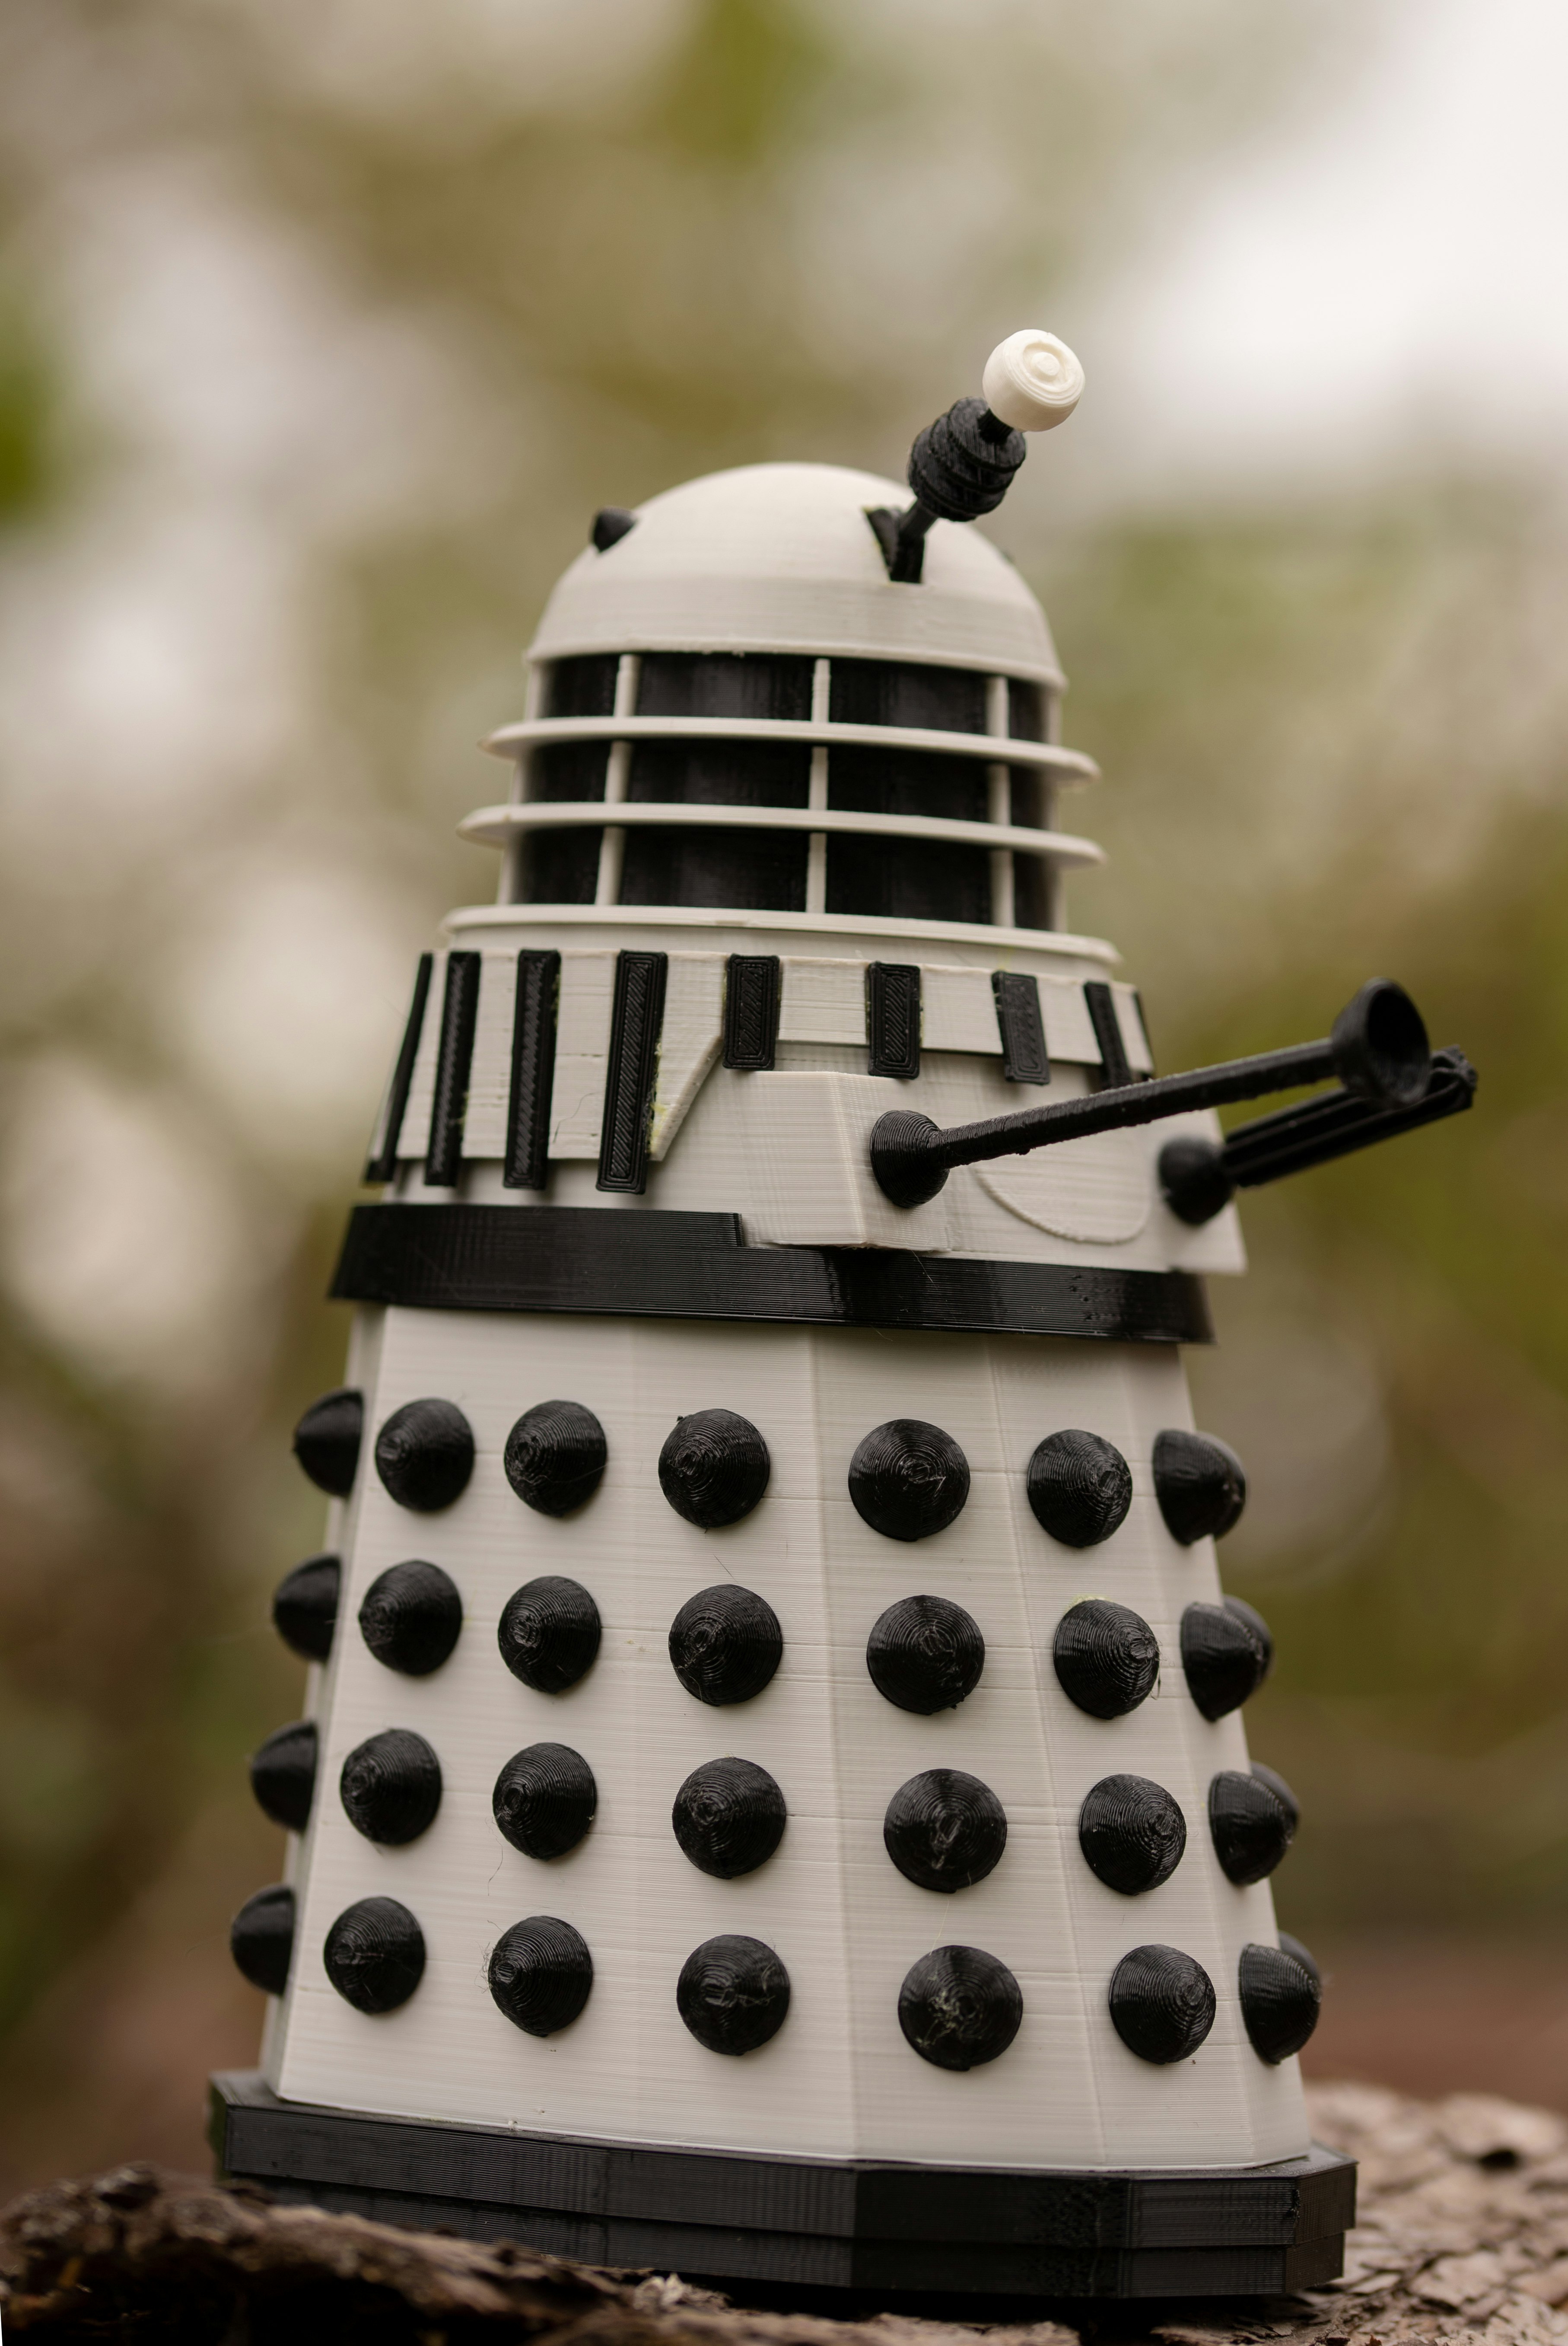 3d Printed Darlek model from the Doctor Who universe.